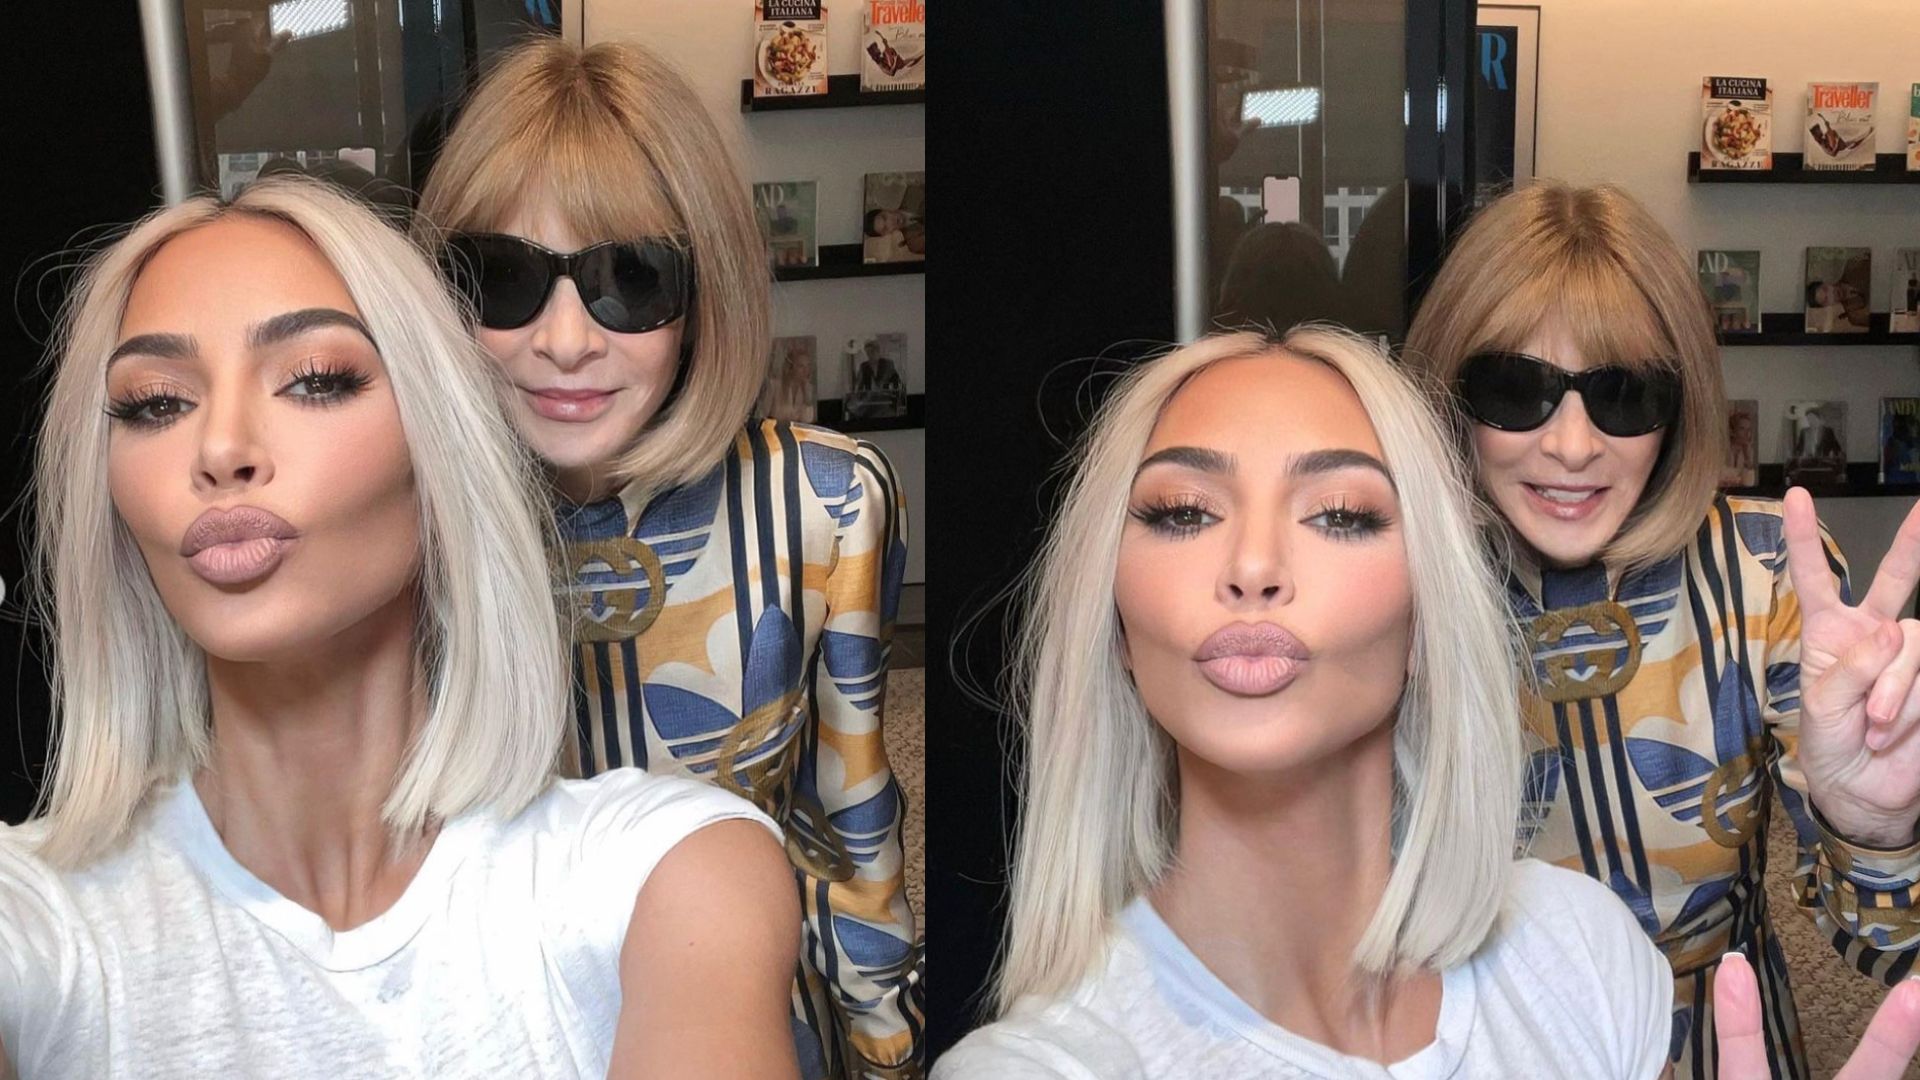 Kim Kardashian posts pictures with Anna Wintour, calls them ‘Bobbsey Twins’